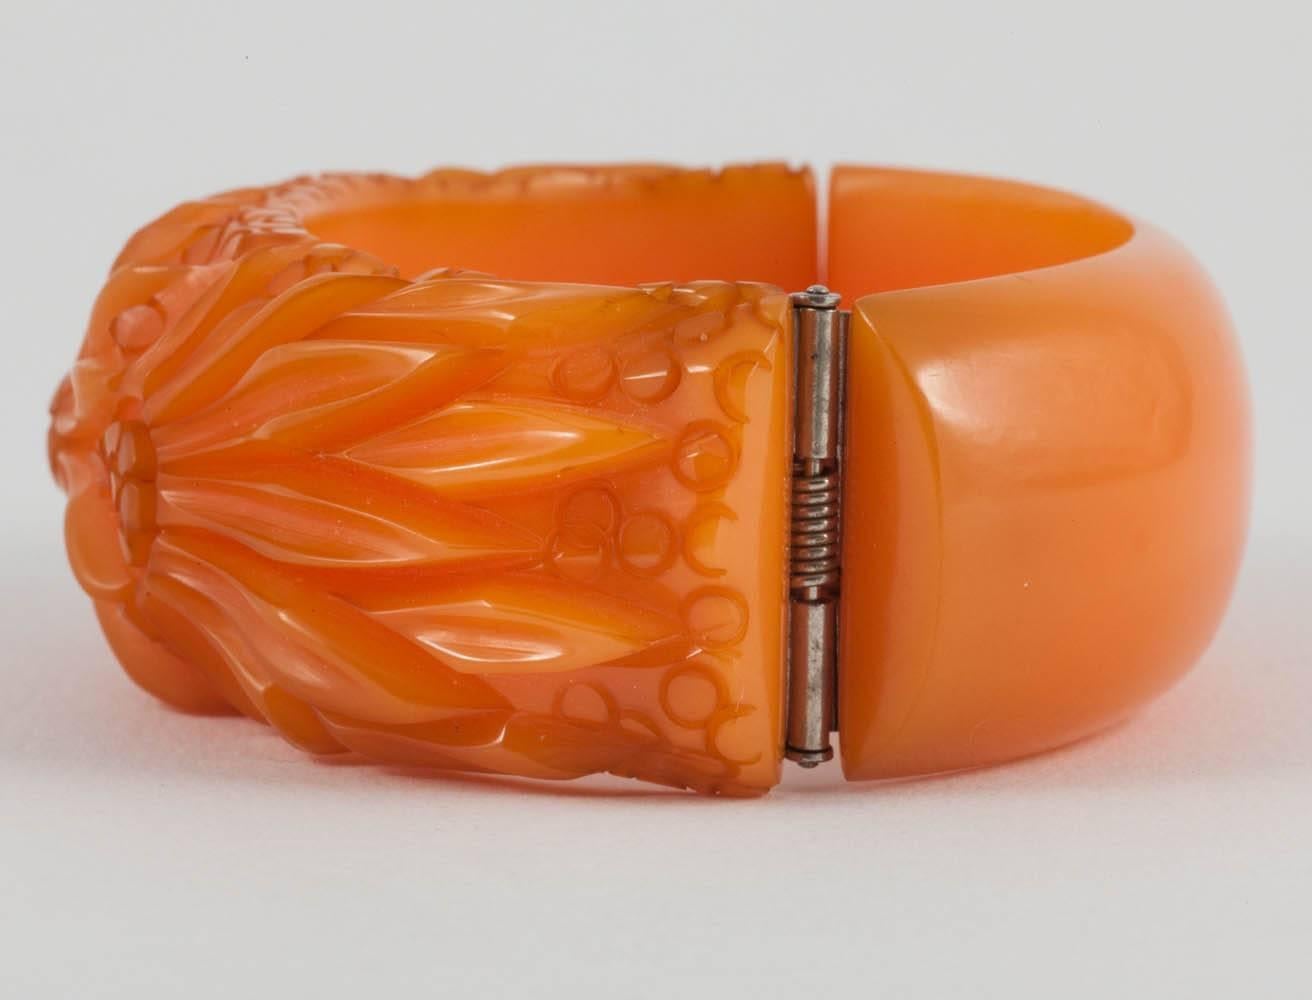 A beautiful hand carved Bakelite bracelet, in a soft amber colourway, from the 1930s
The hinged mechanism works perfectly and securely.
This is one of a group of five similar Bakelite bangles being sold (all pictures below), three were listed last